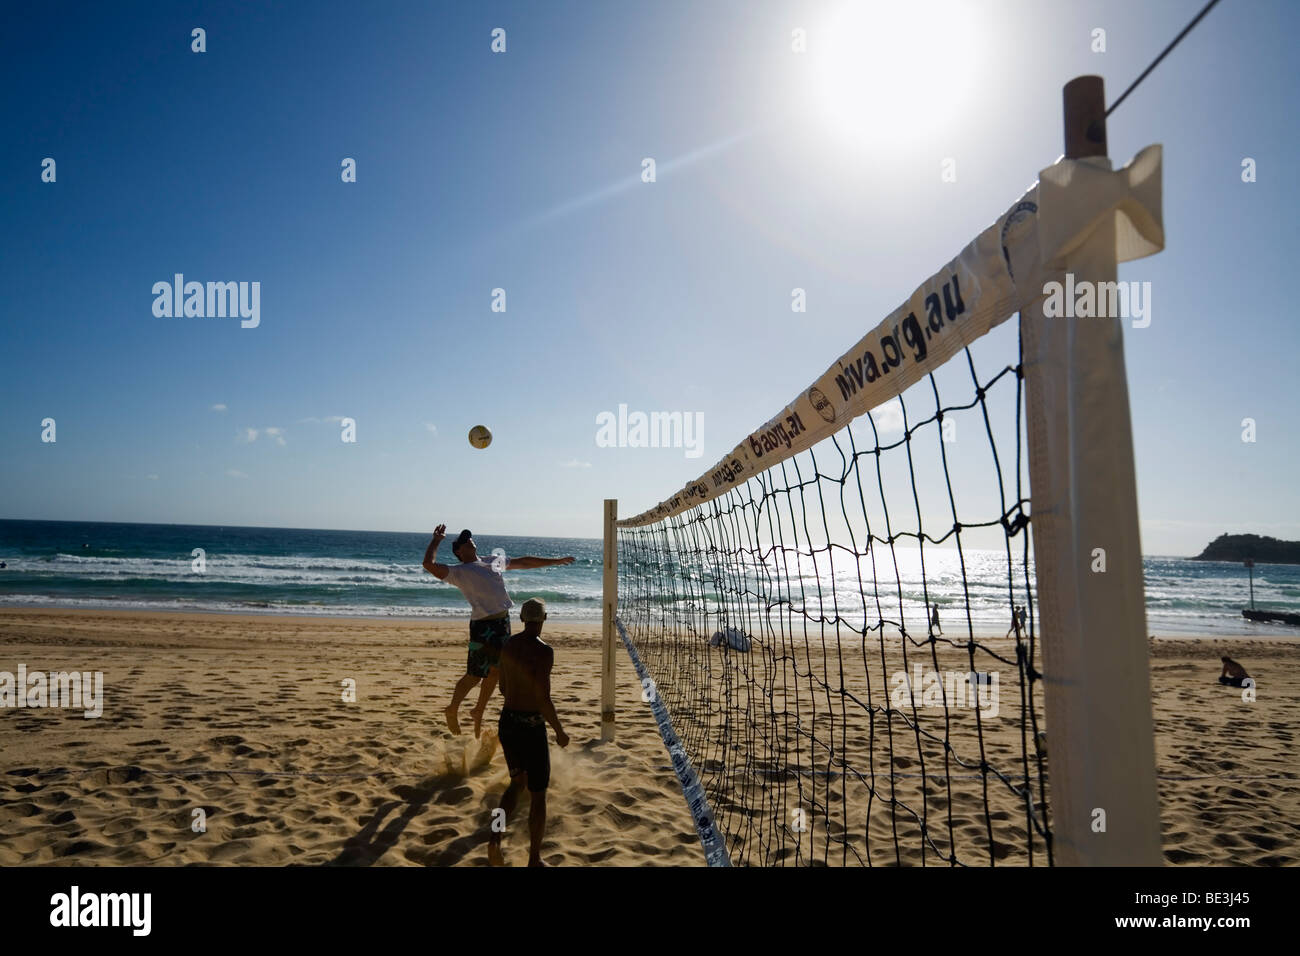 Beach volleyball game at Manly Beach. Sydney, New South Wales, AUSTRALIA Stock Photo